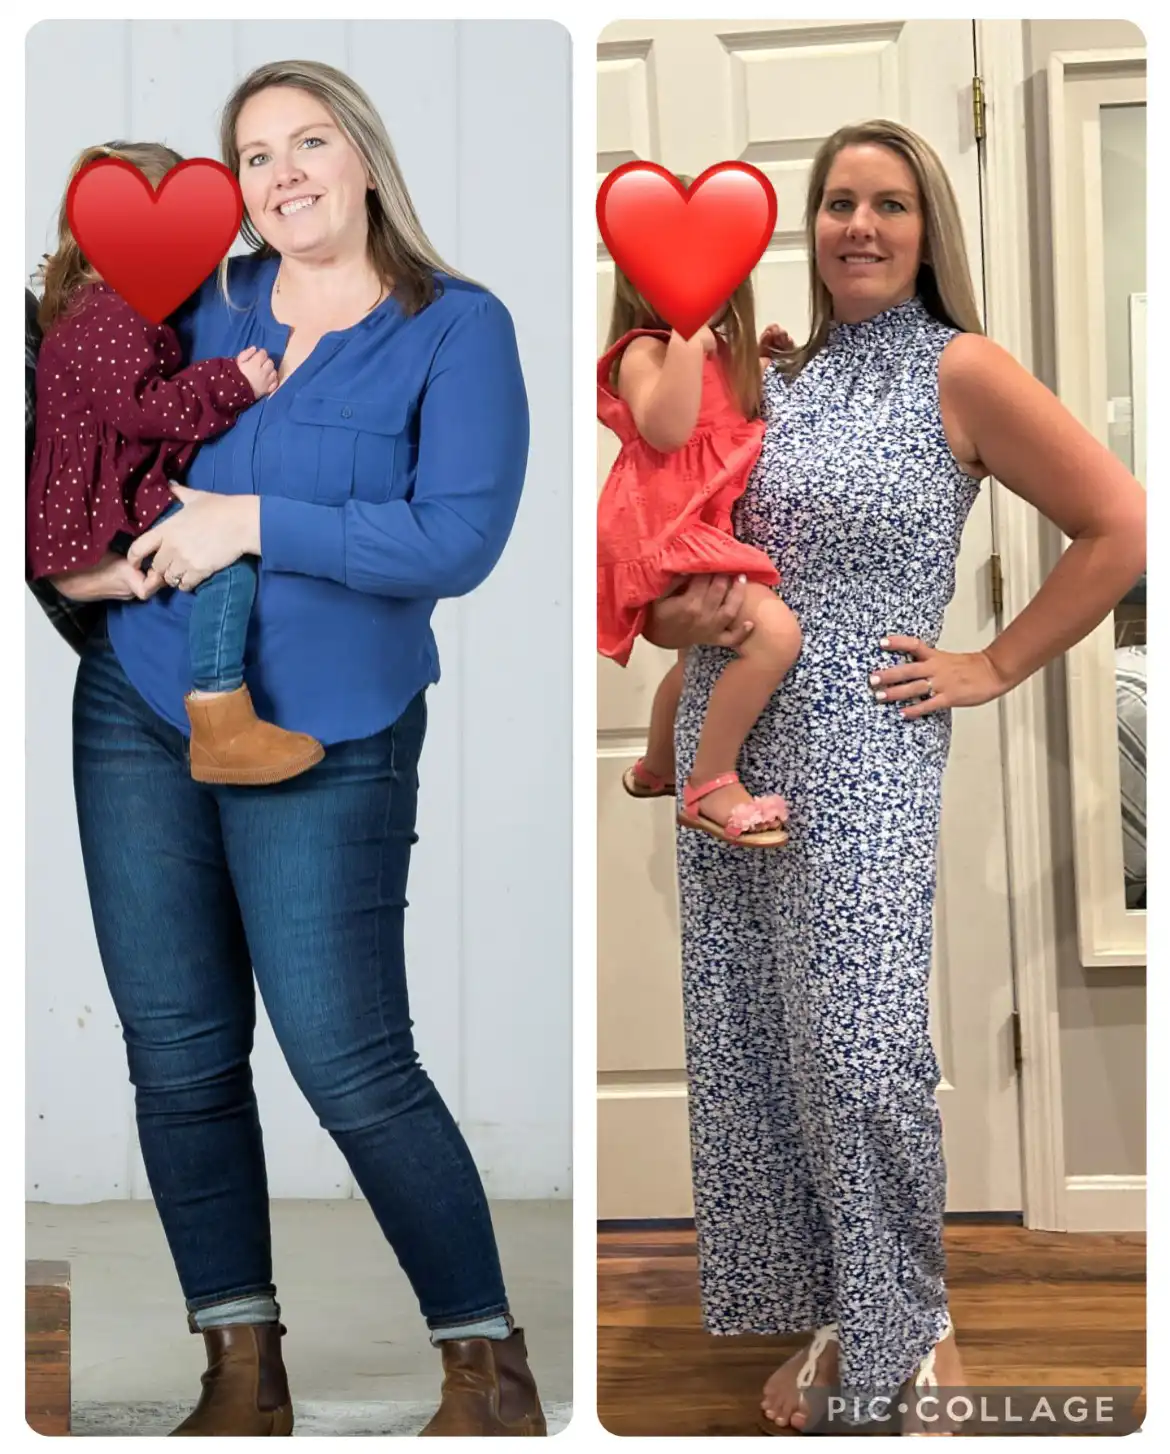 Erika before and after weight loss